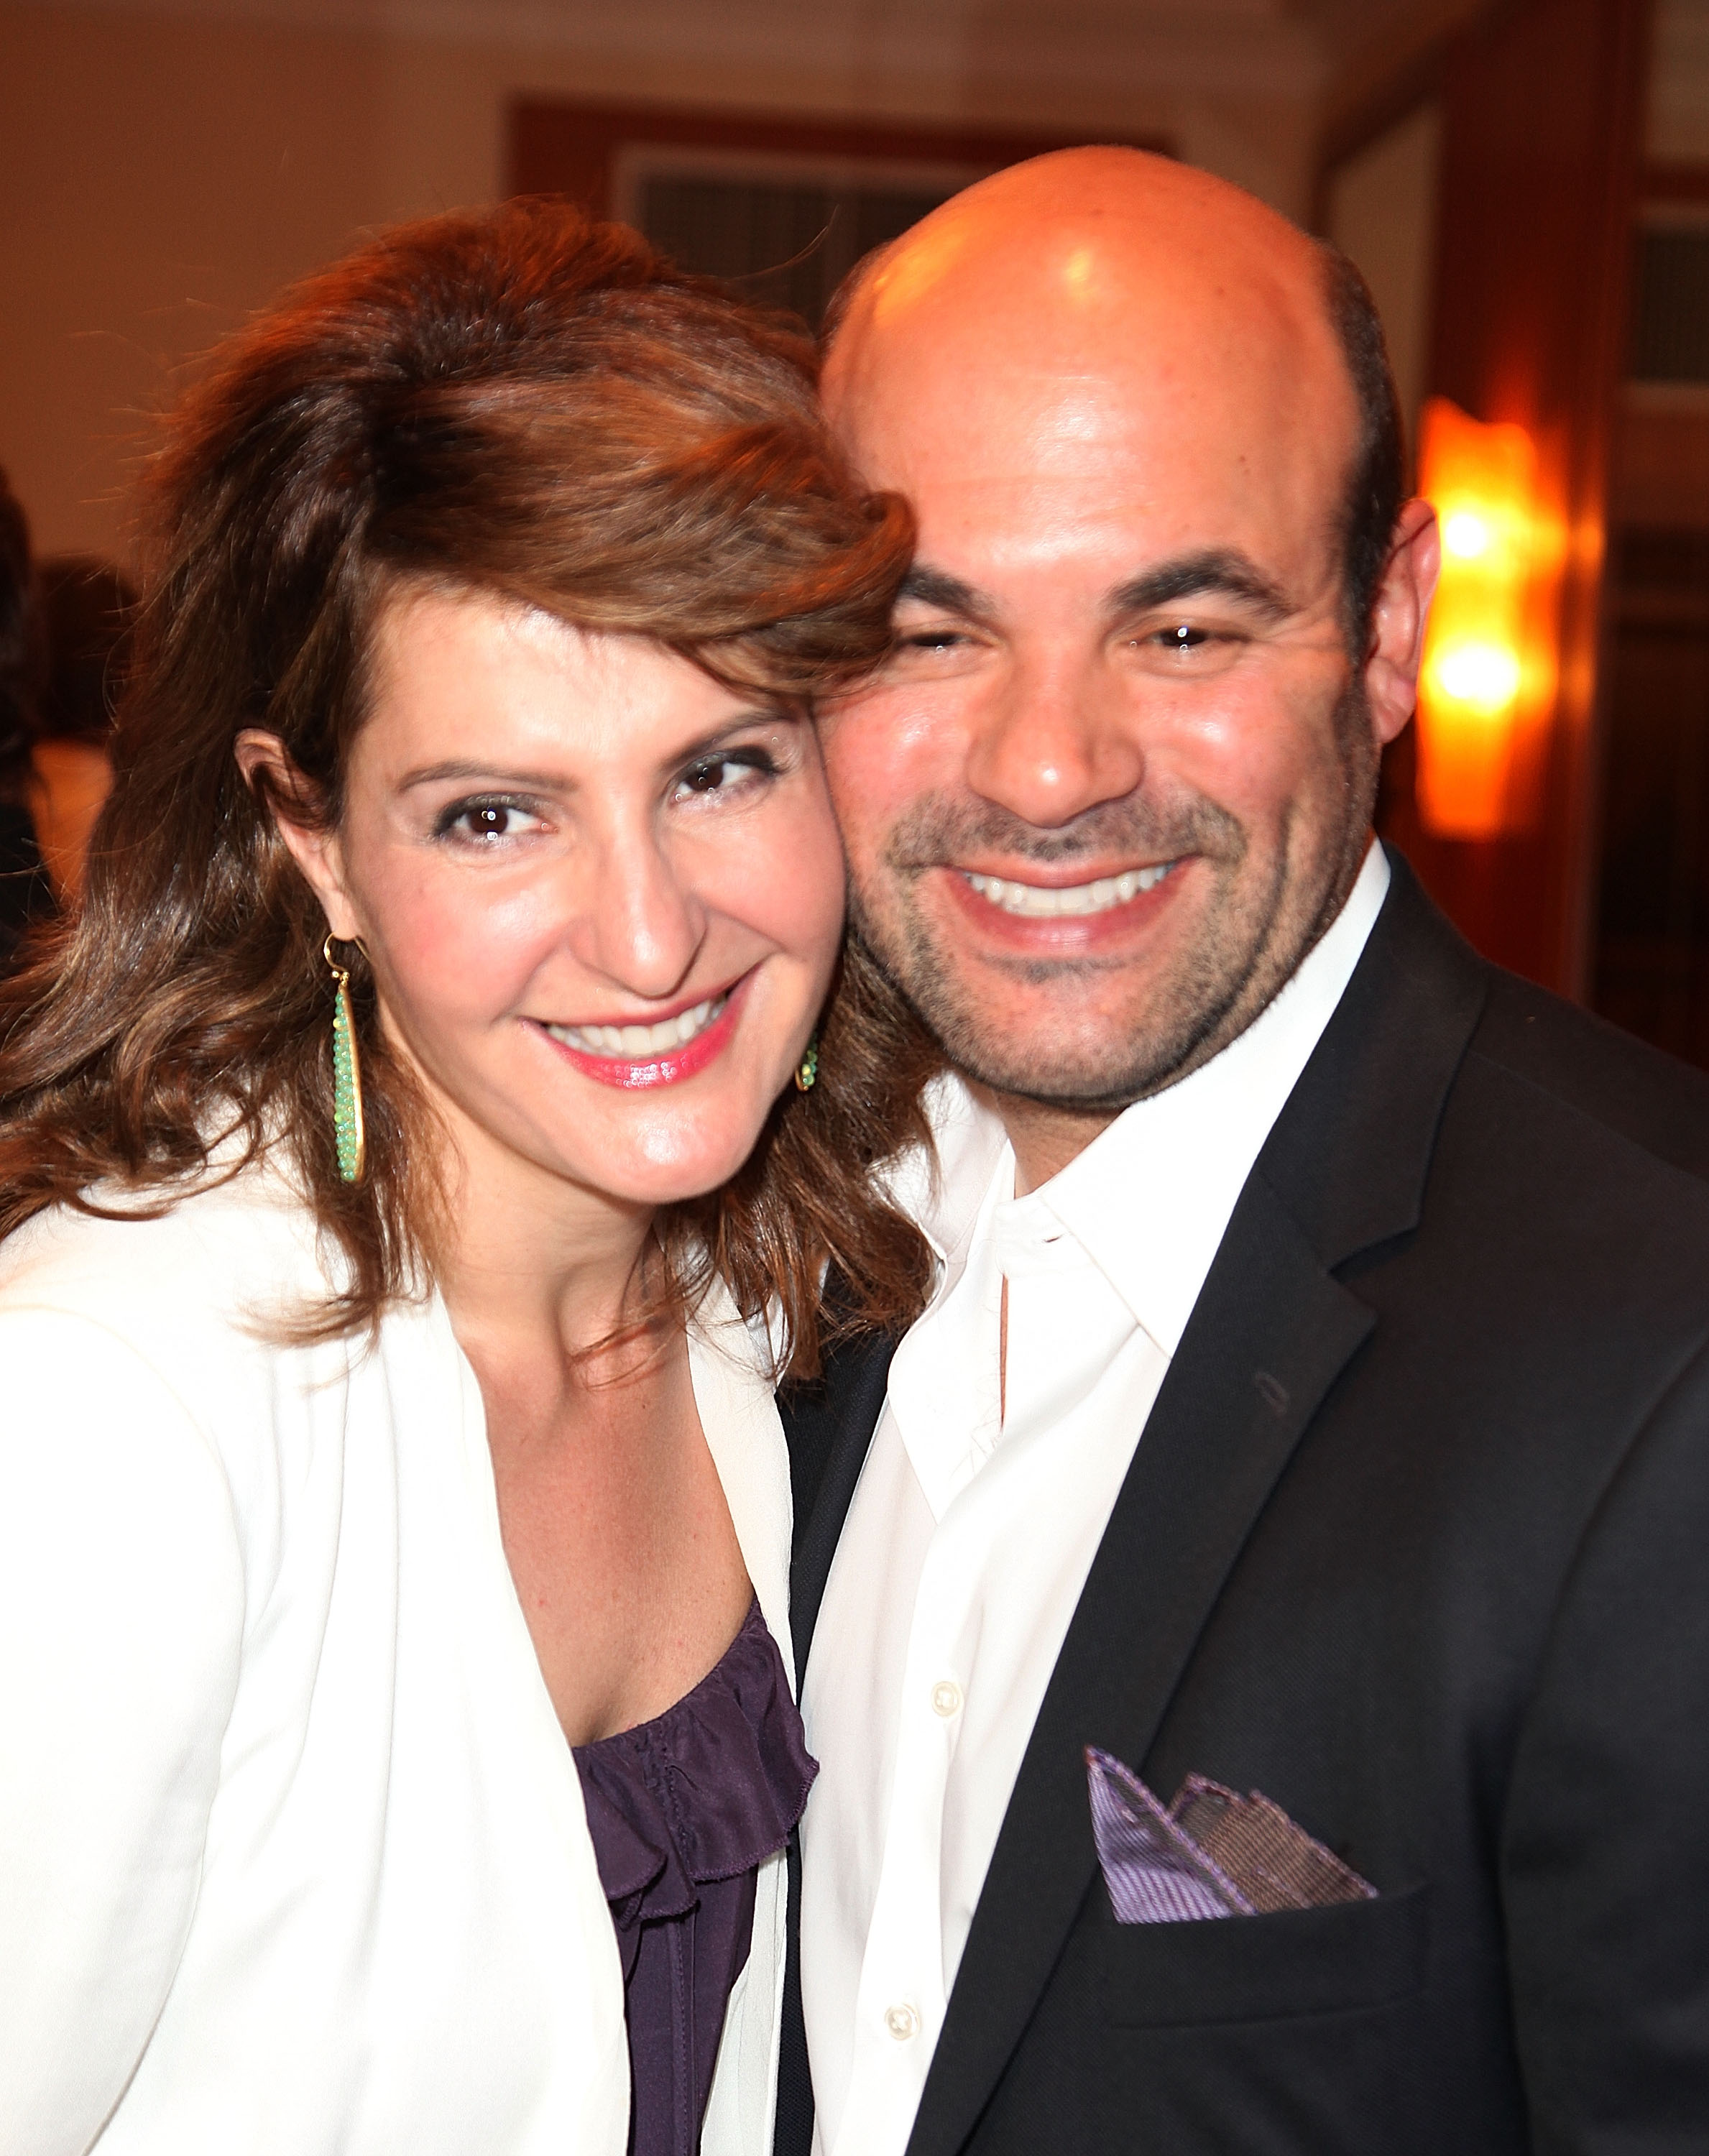 Nia Vardalos on Adopting Her Daughter: “I'm So Grateful and Can’t ...